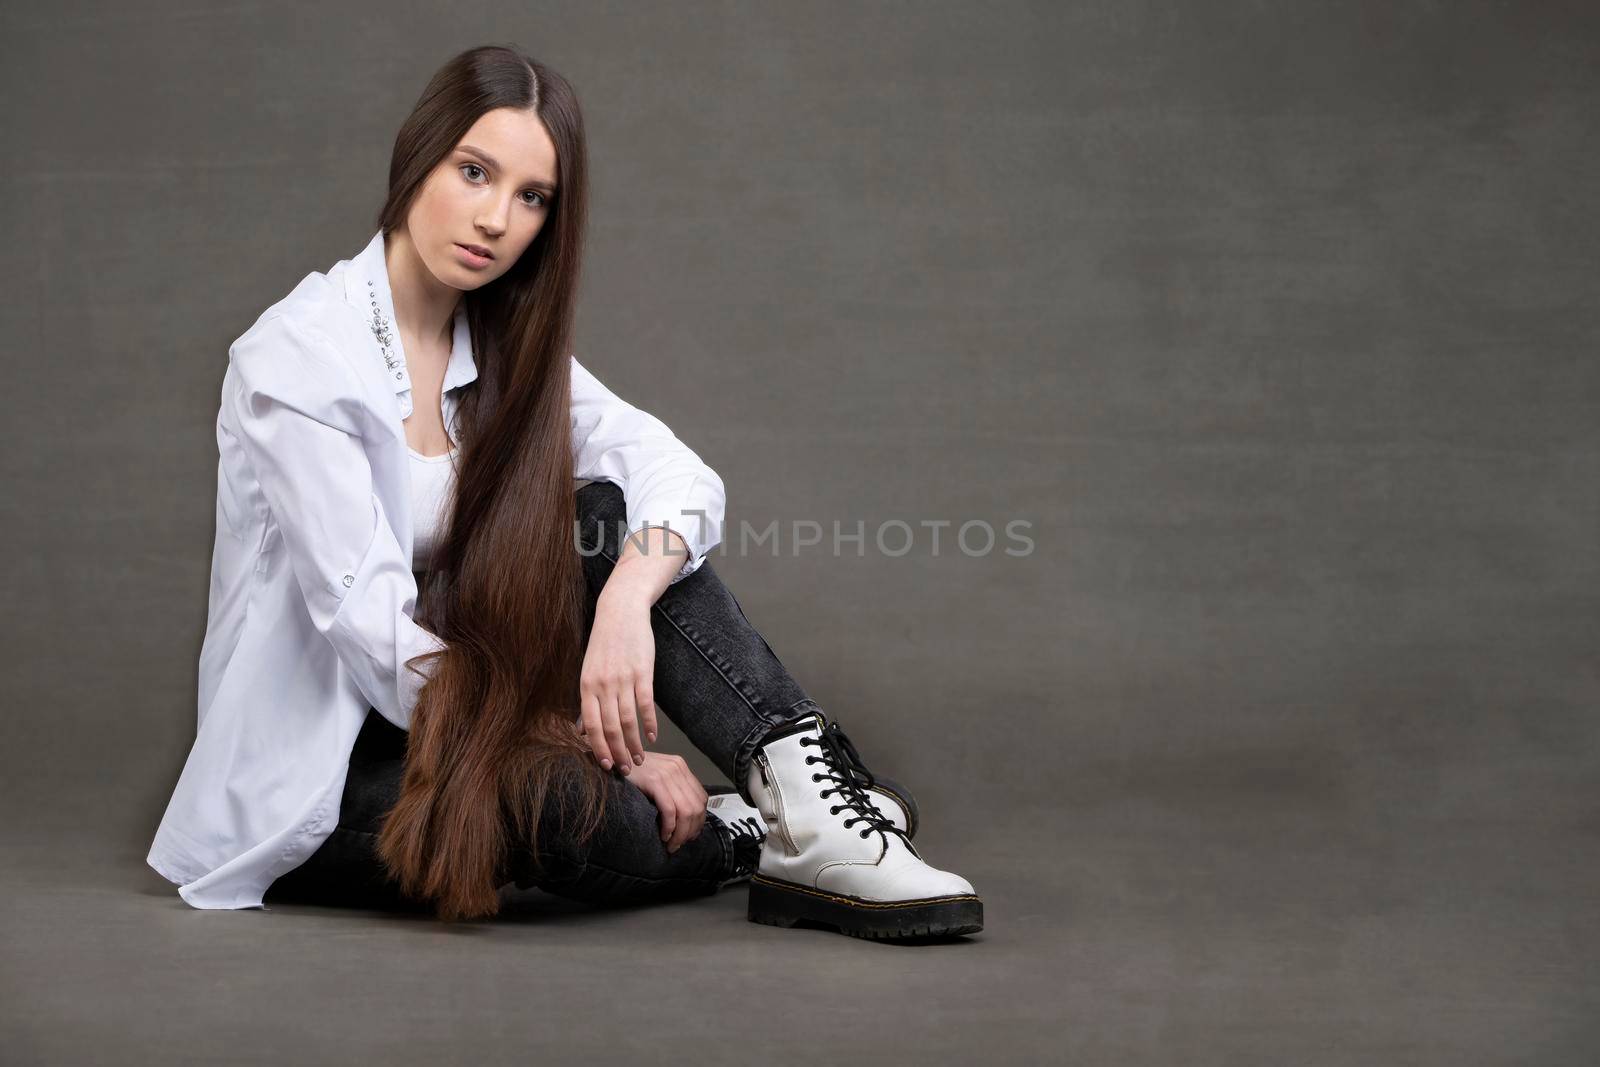 Beautiful brunette girl with very long hair on a gray background.